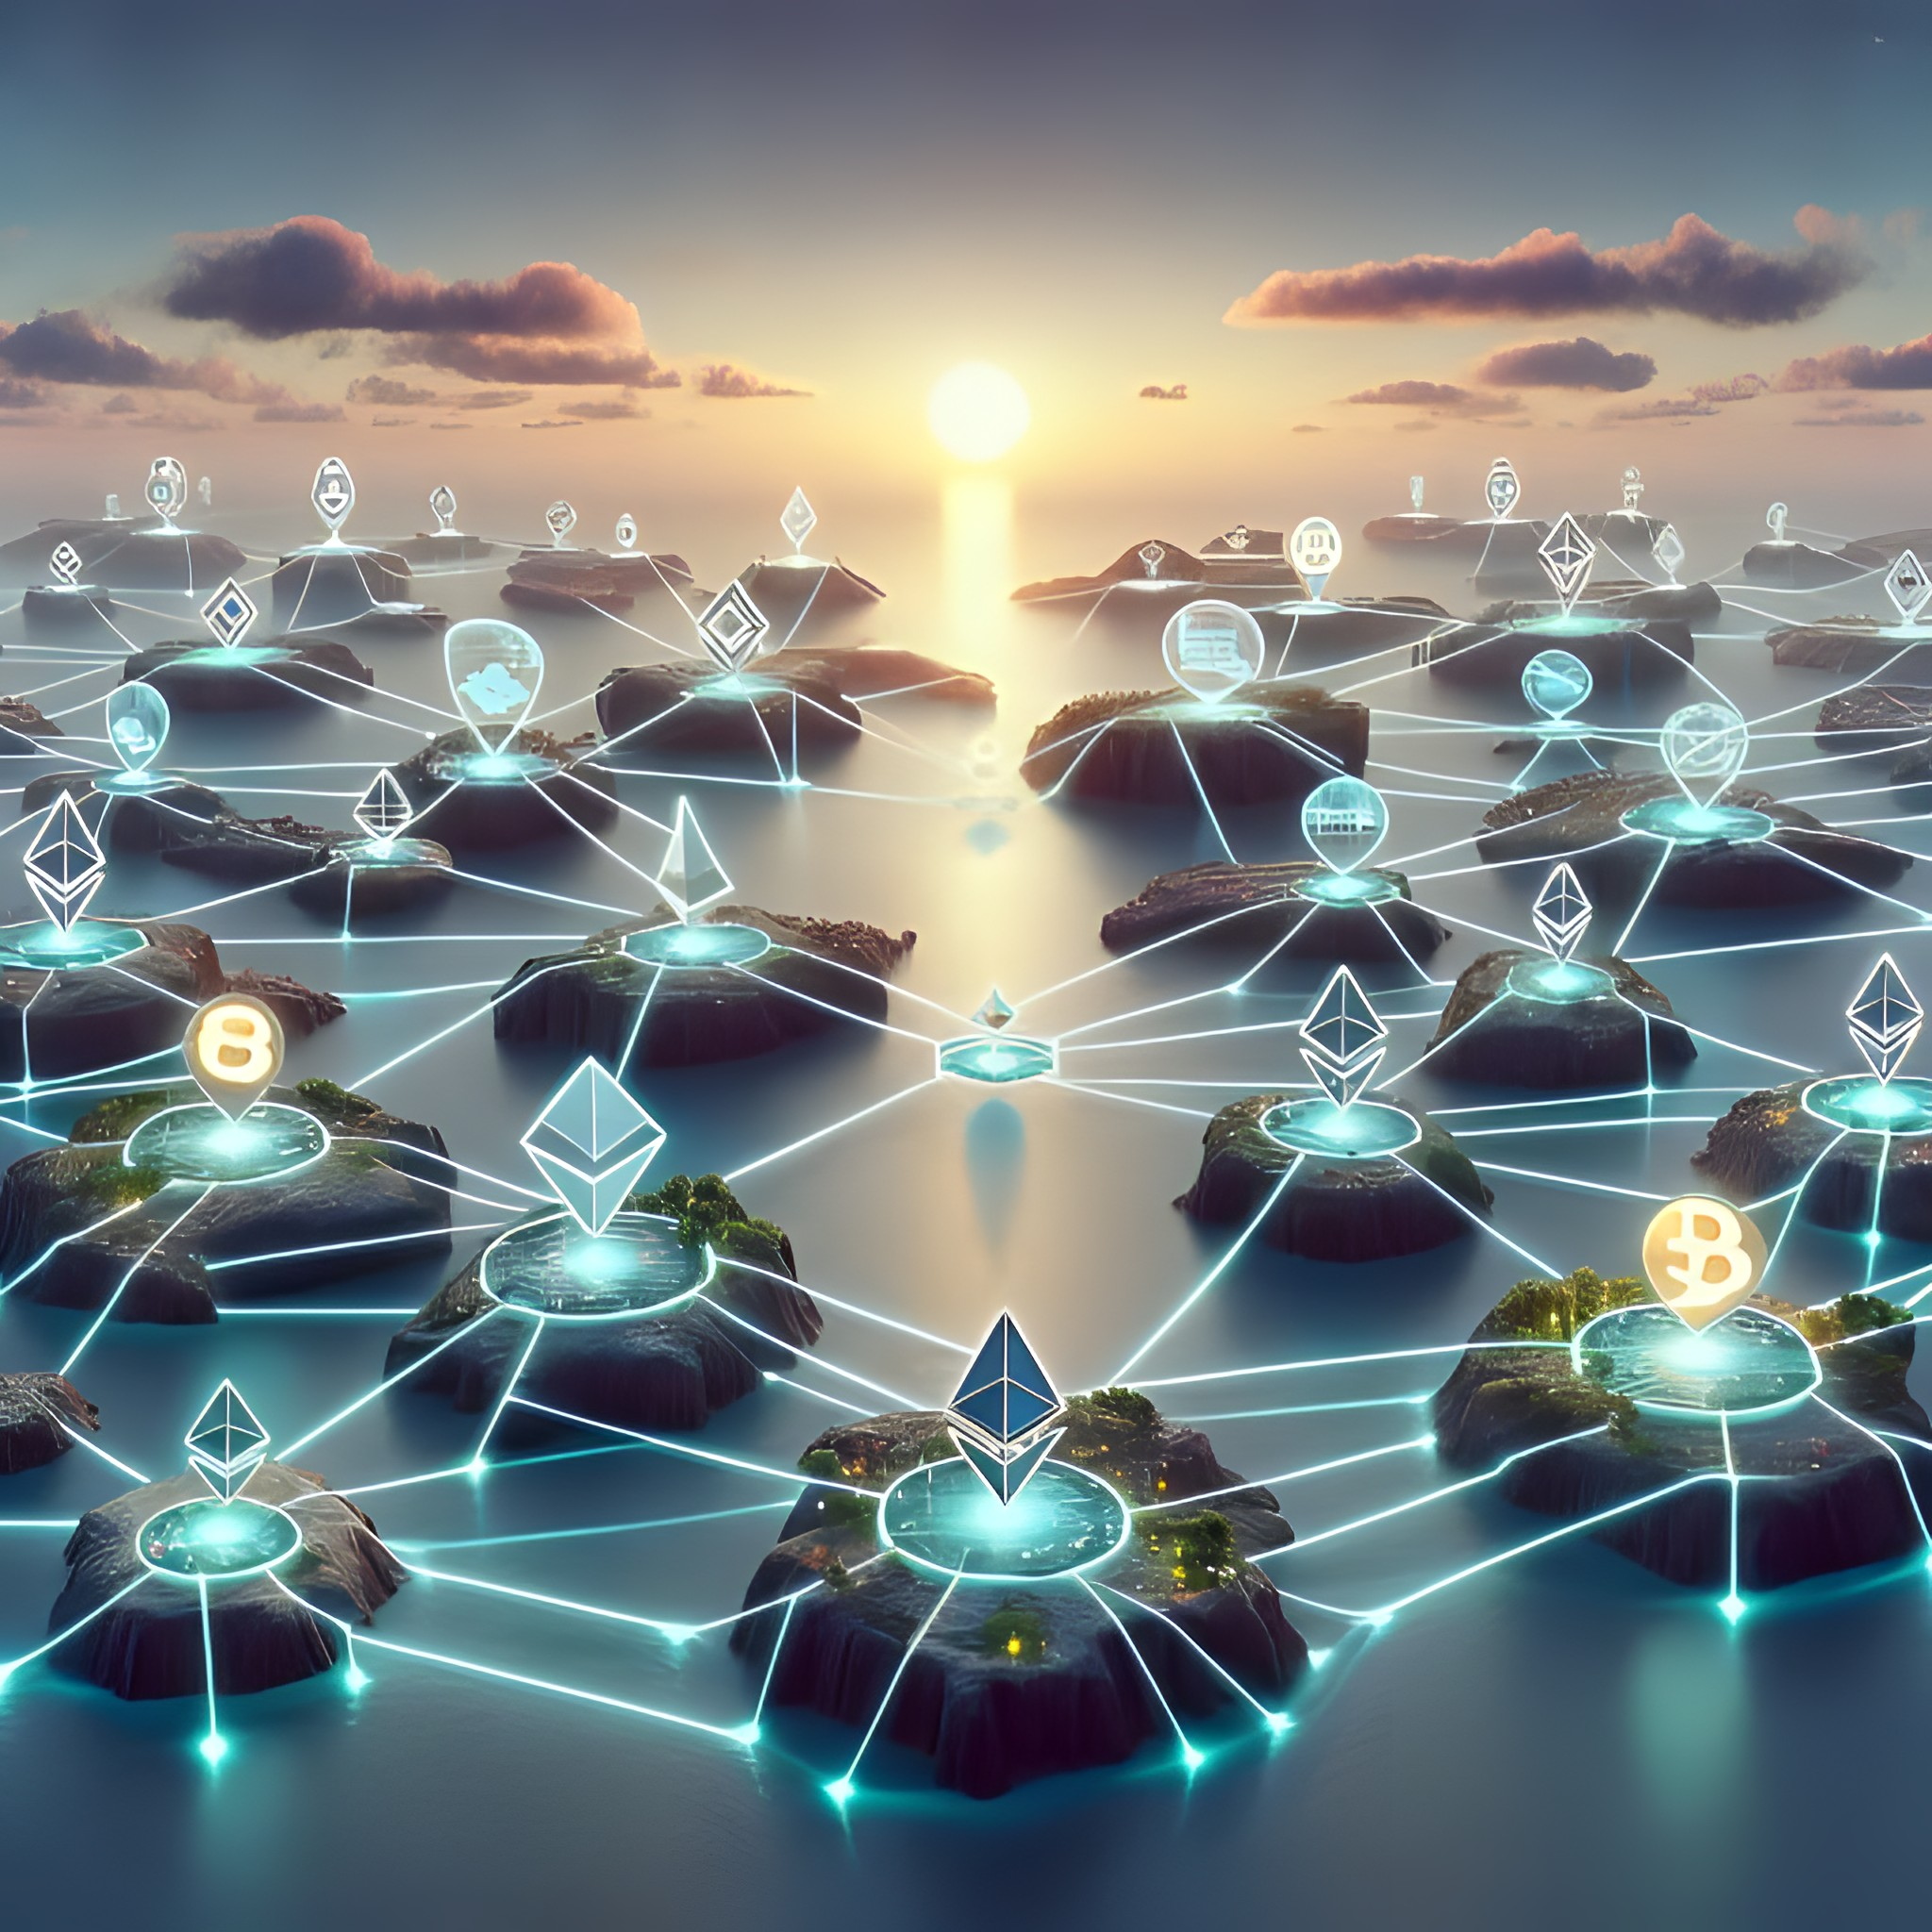 A futuristic bridge connecting a diverse web of interconnected blockchain networks.